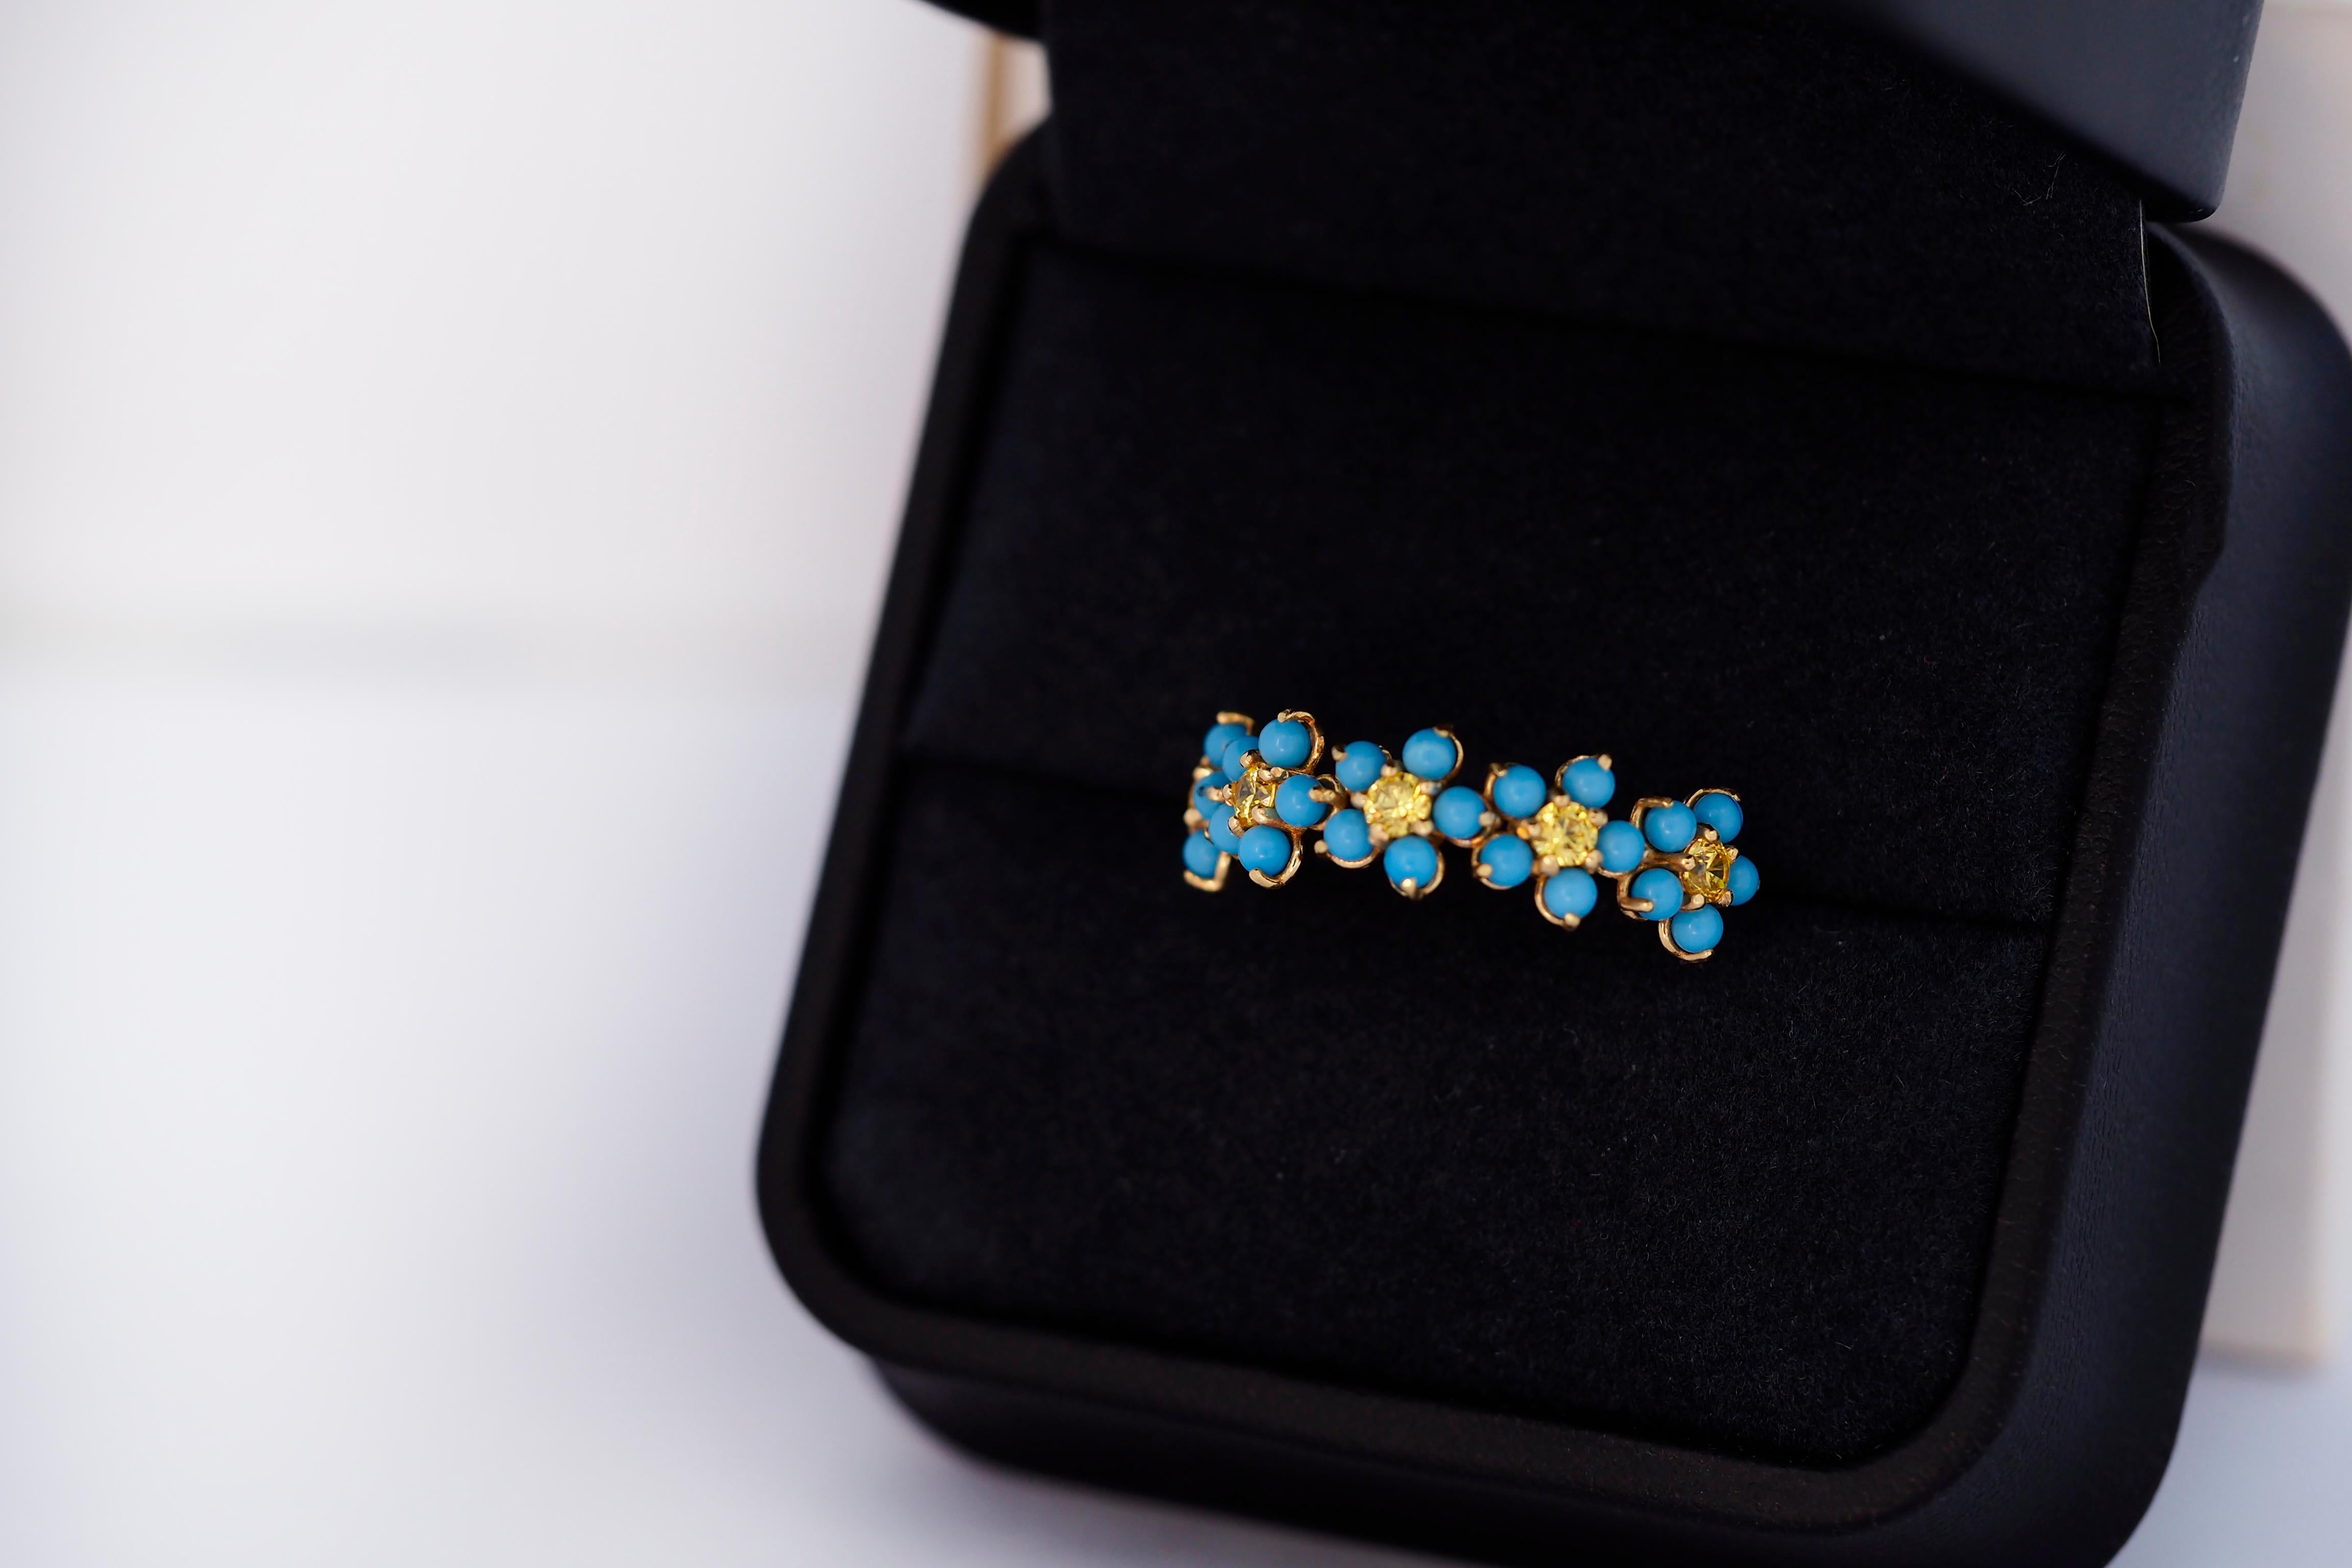 Forget me knot flower 14k gold ring. Five blue petal flower gold ring. Nature inspired ring with turquose and lab sapphire. Lucky flower ring.

Metal: 14k gold
Weight: 2.2 gr depends from size
Gemstones:
Turquoses: natural treated, round cabochon